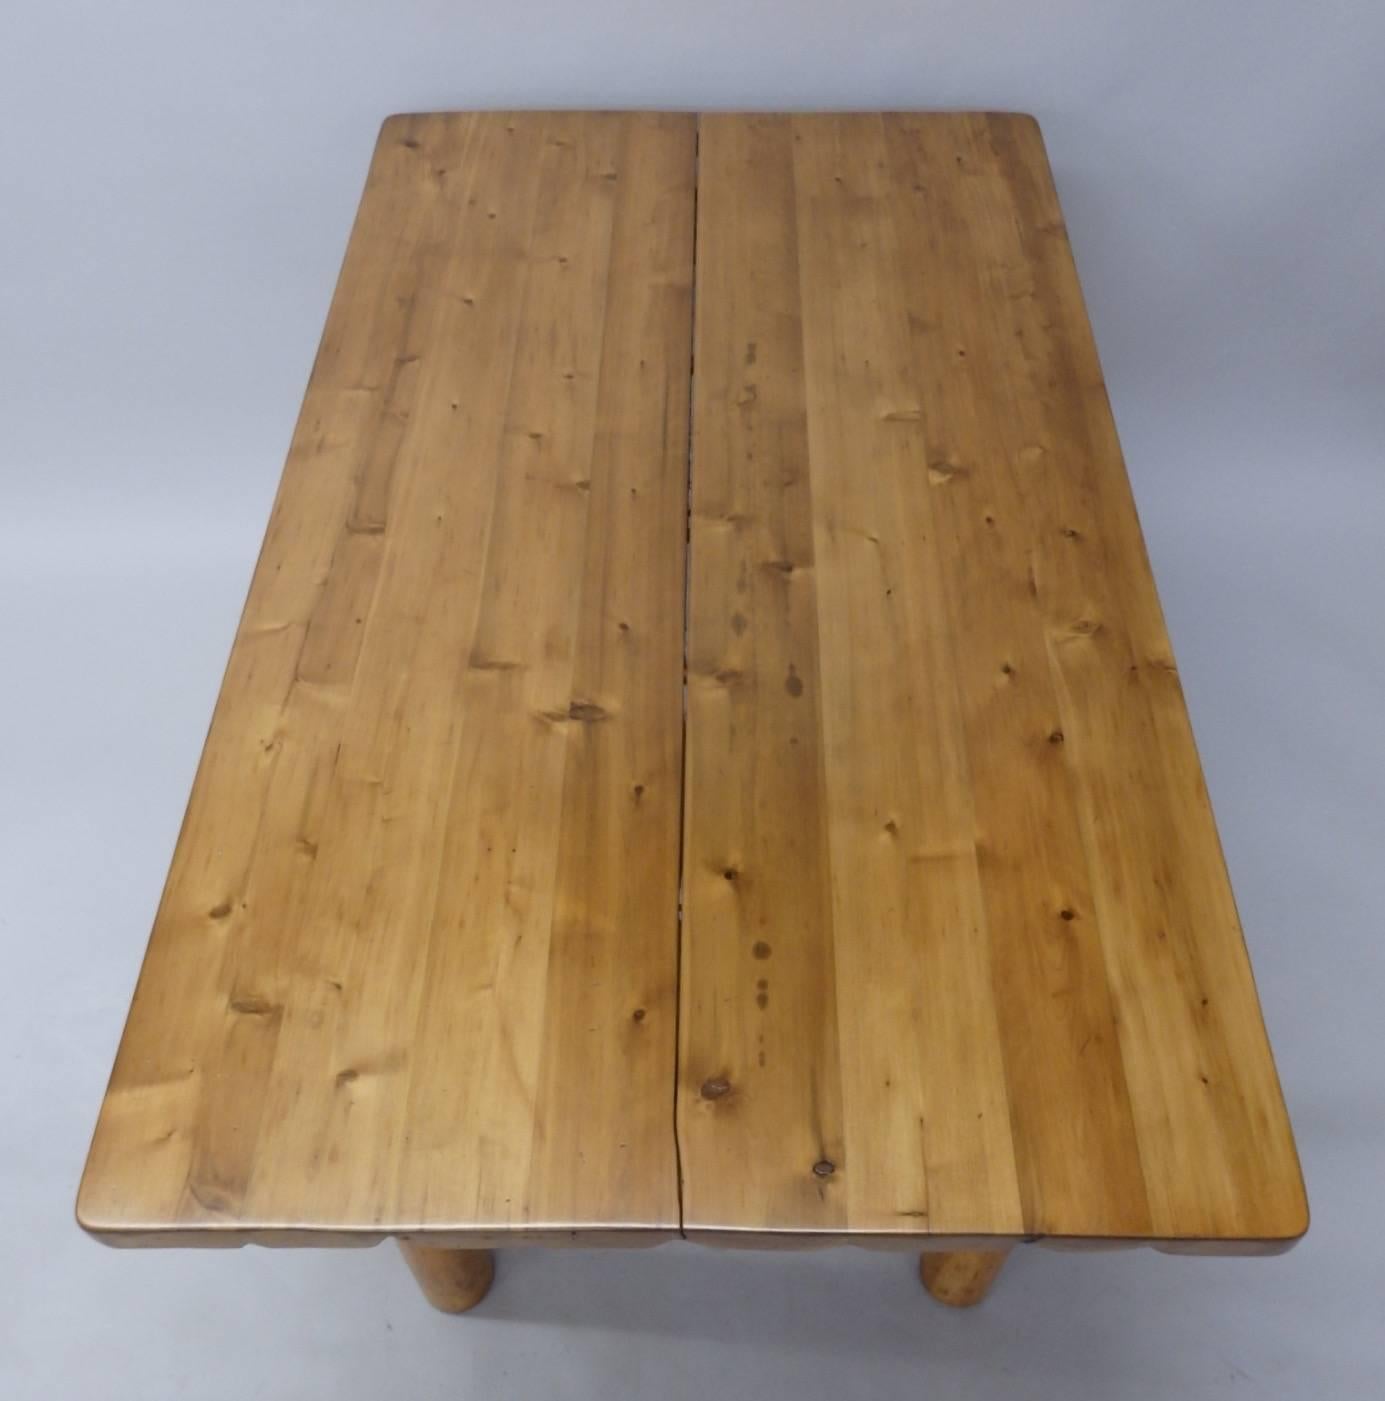 20th Century Knotty Pine Rustic Adirondack Cabin, Ranch or Cottage Dining Table with Benches For Sale